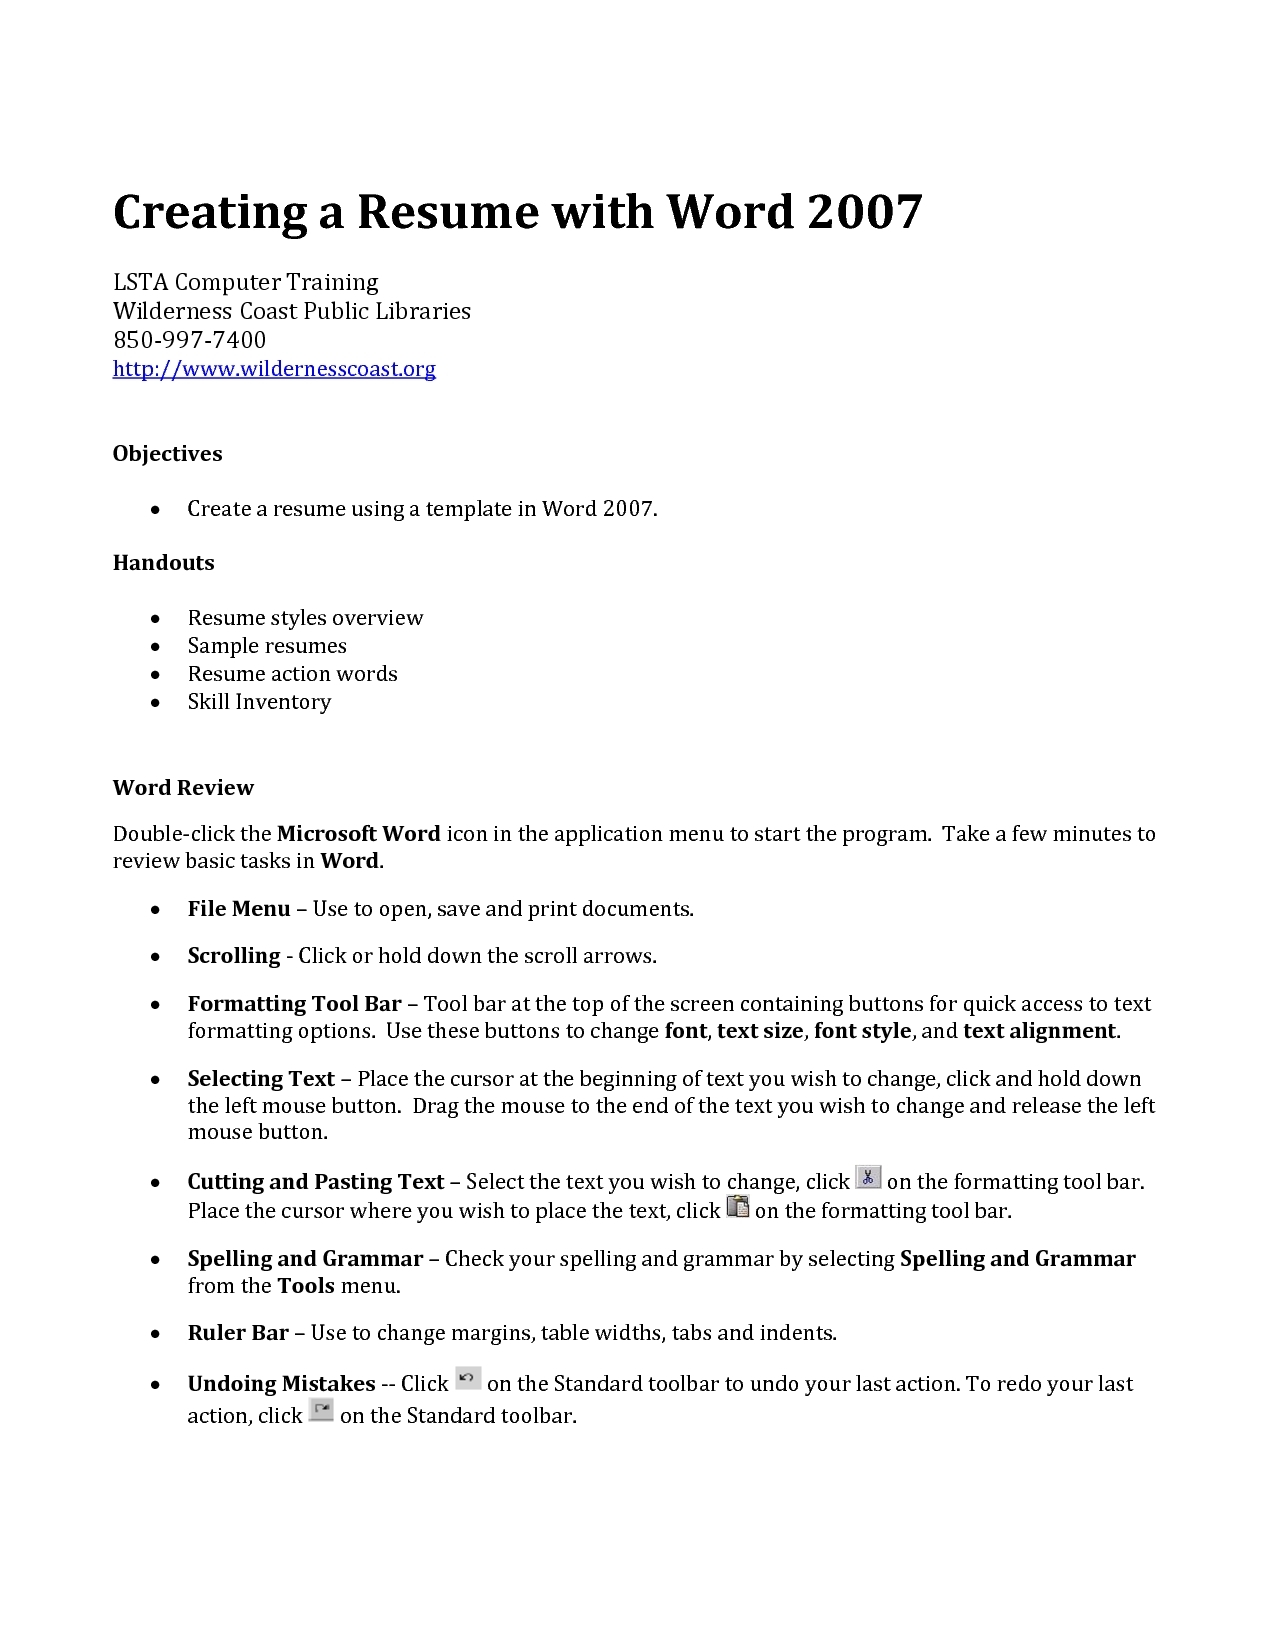 how to create a resume